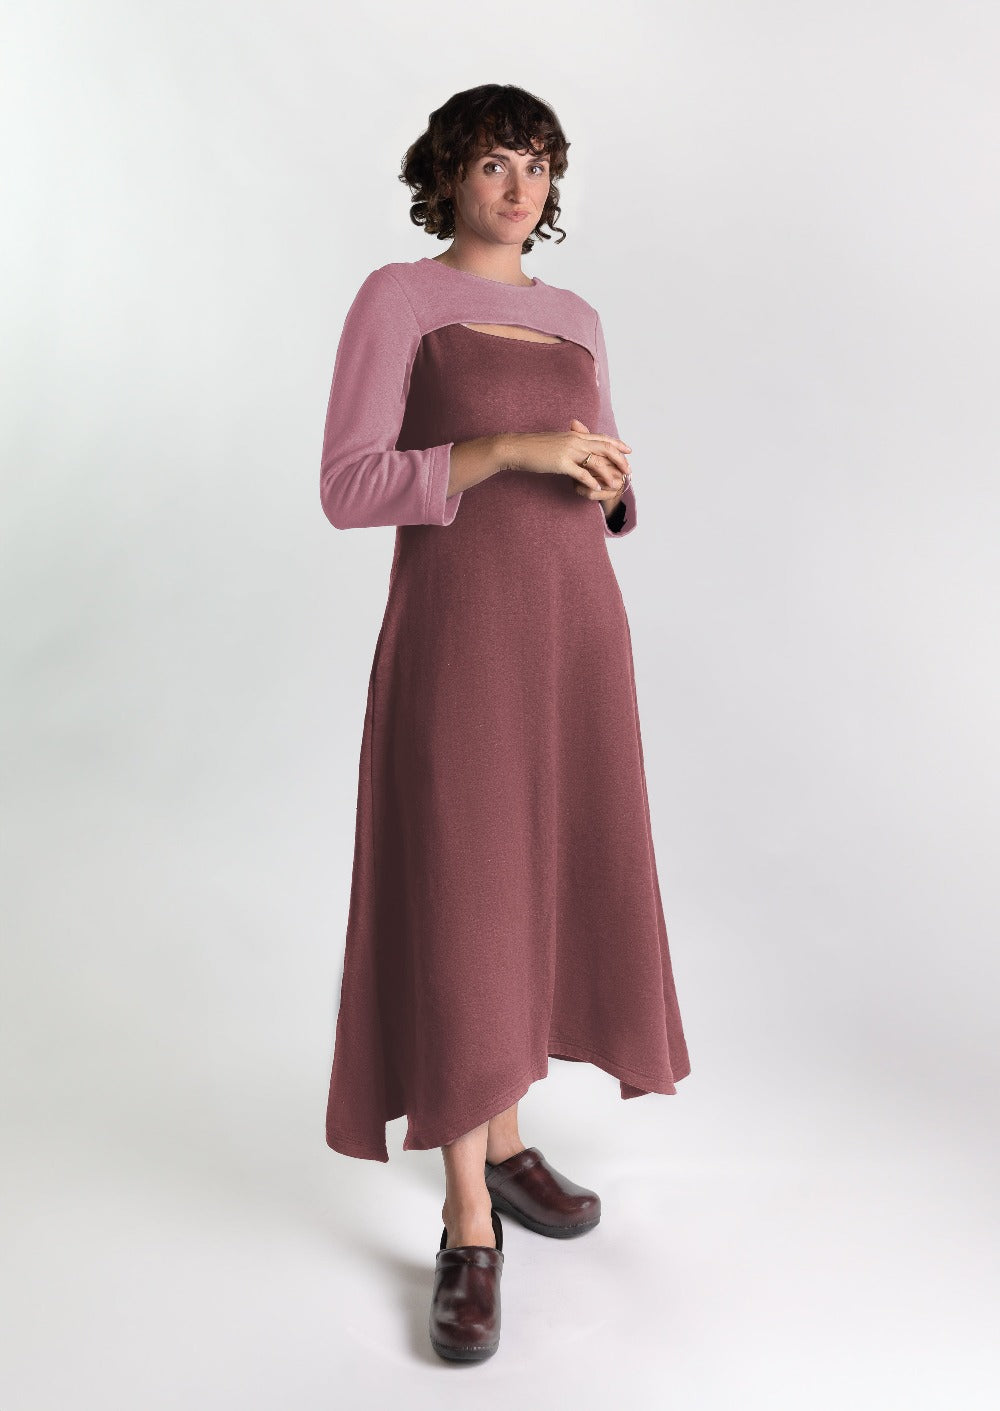 Woman is a cozy stylish dress that is chest port accessible for infusions. 